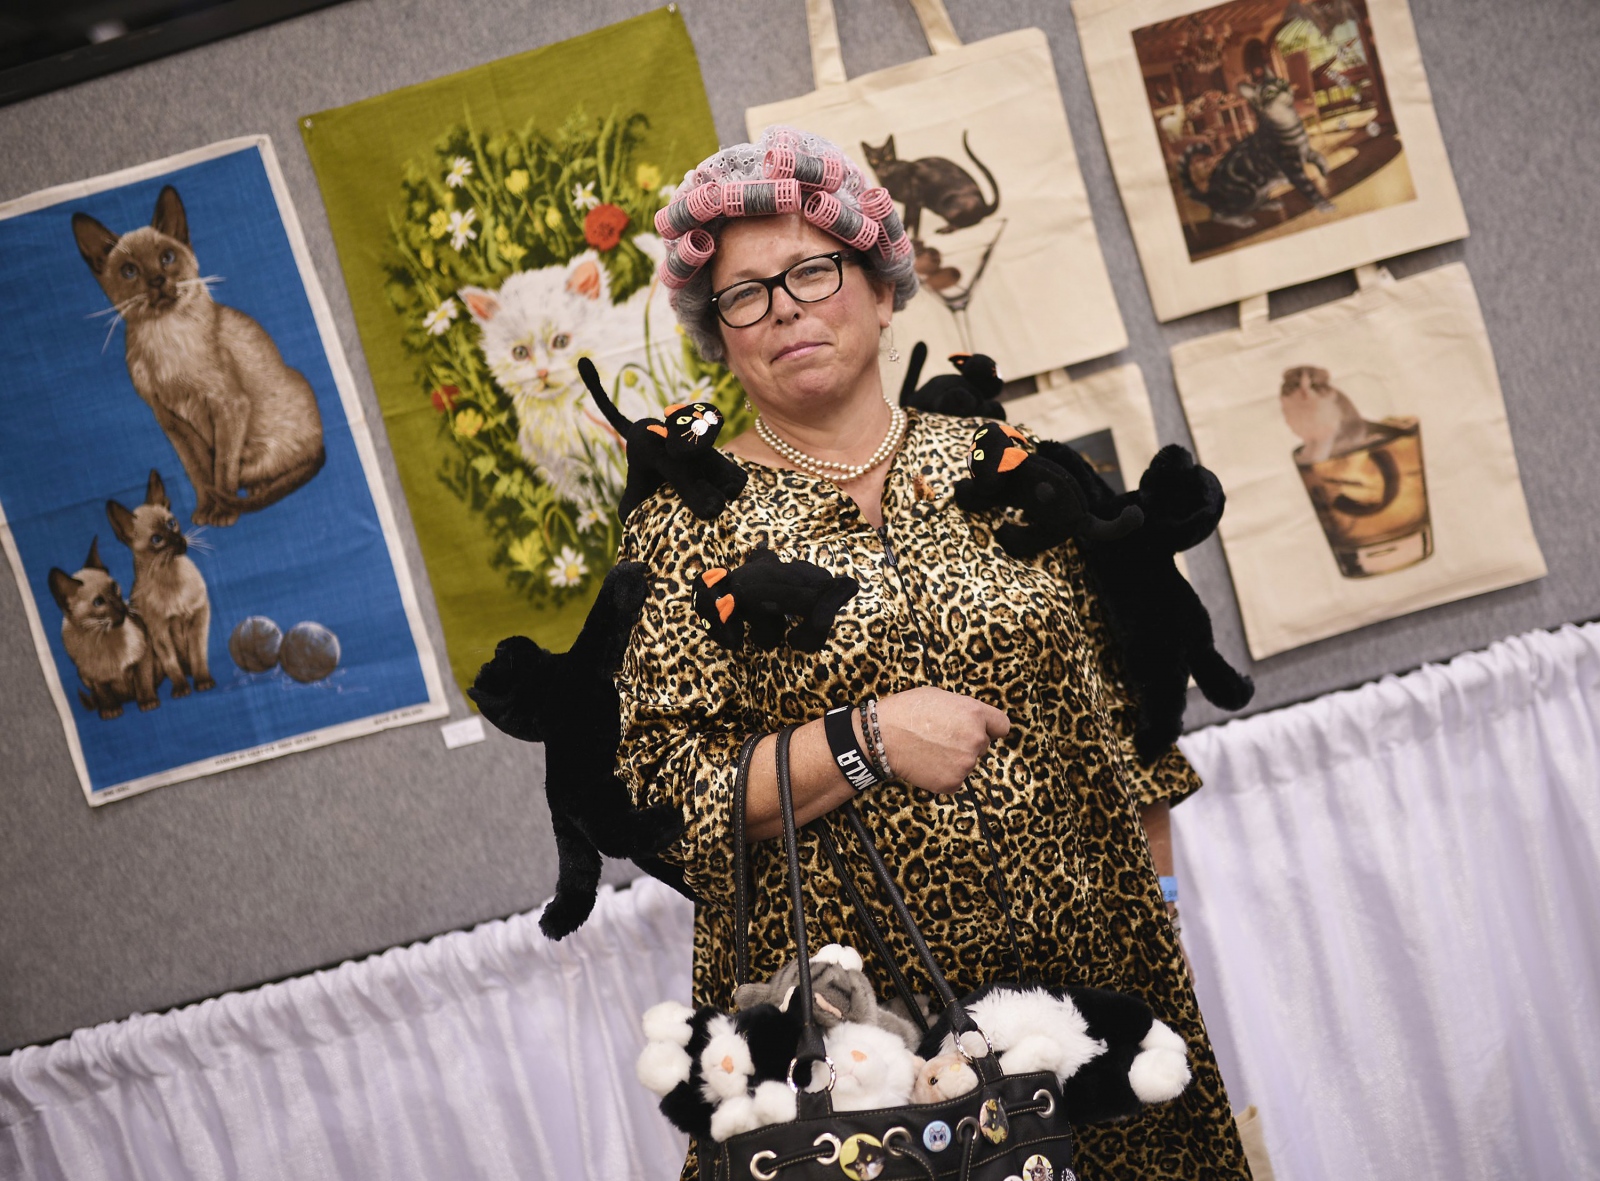 Image from CatCon